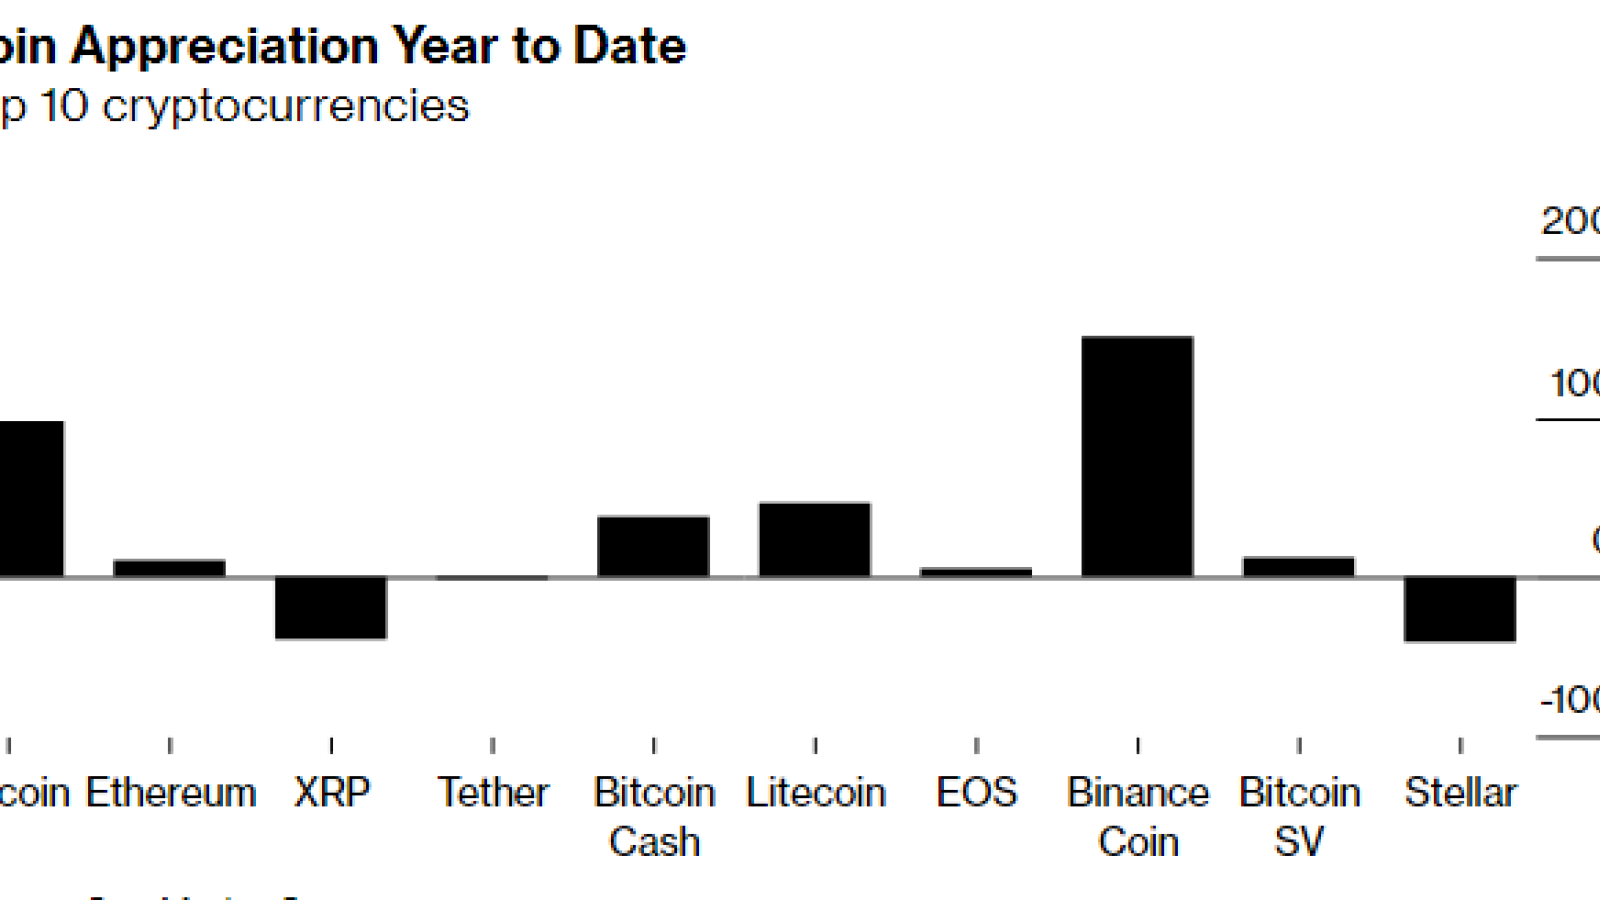 Binance Coin Outperformed Bitcoin in 2019